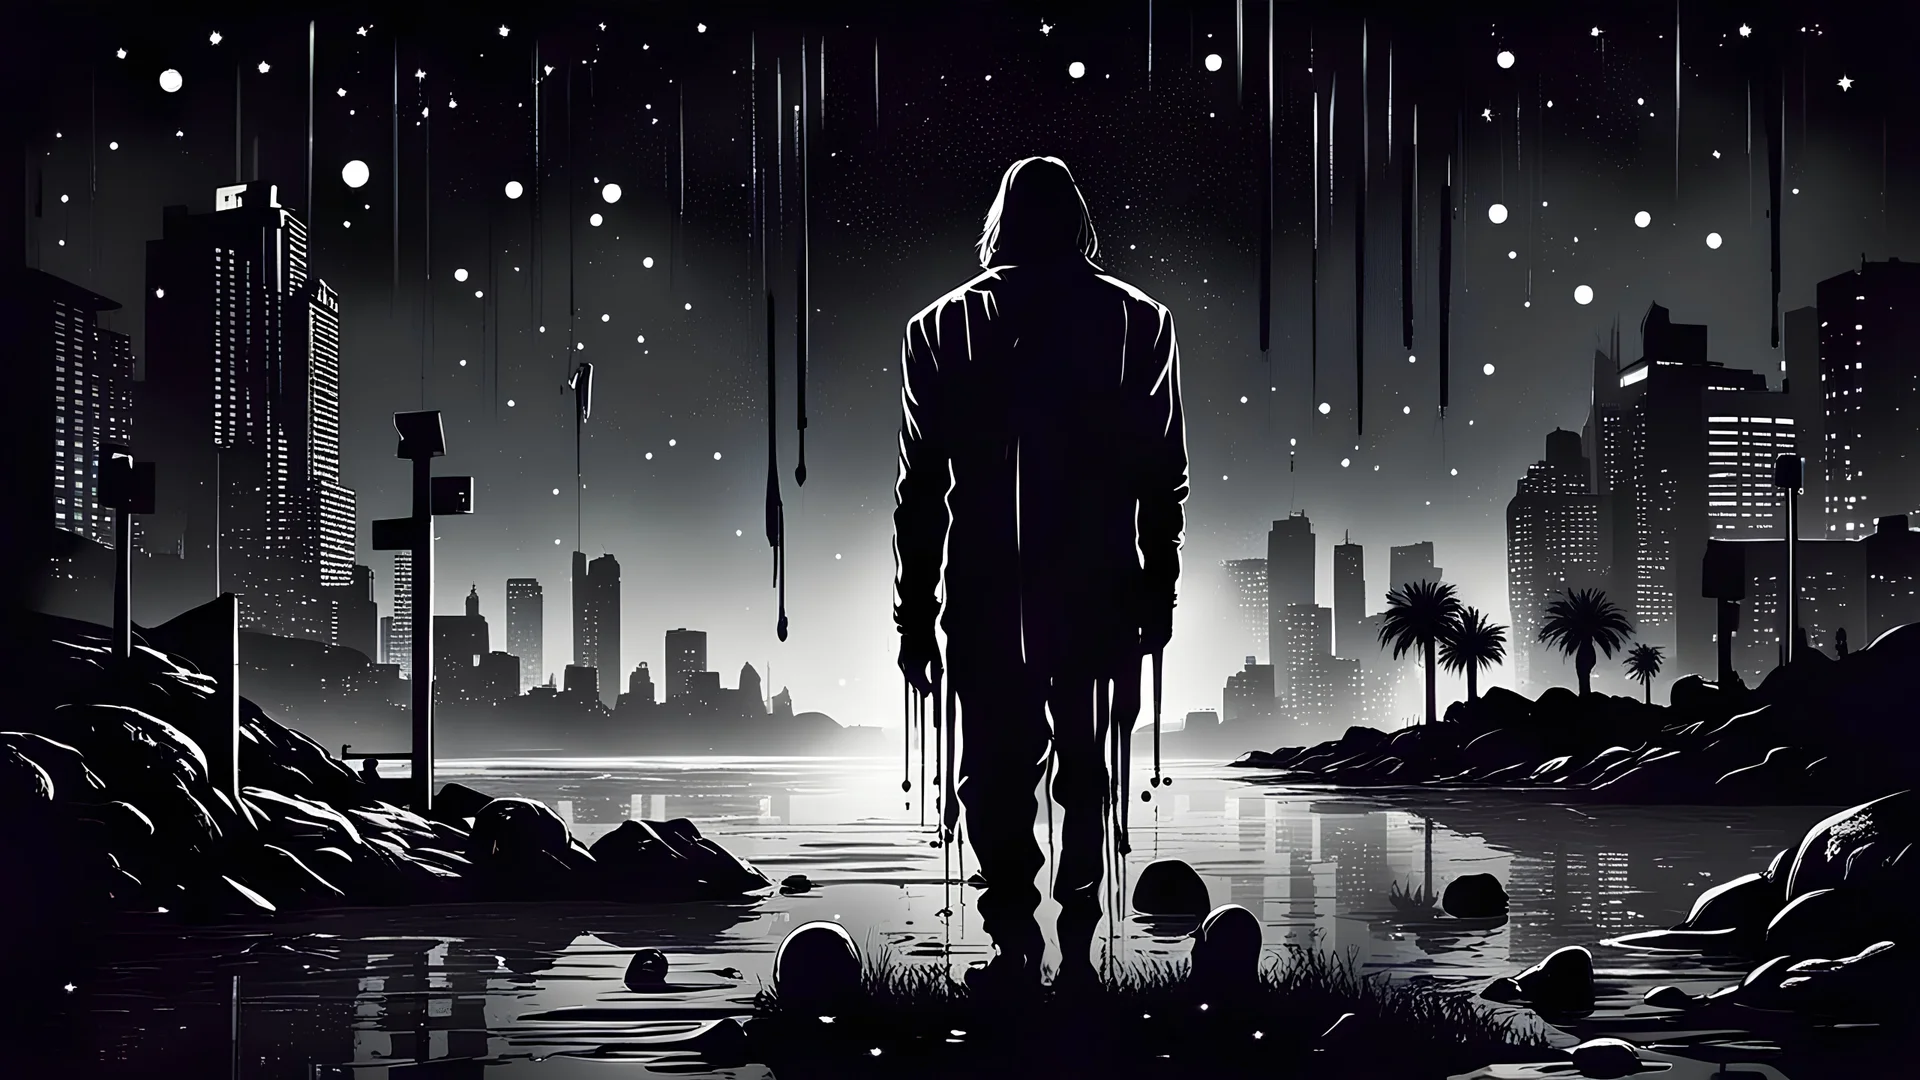 Sin city, killer dripping blood, night full of stars, savage, Alone, mysterious, hidden face, clam and relaxed, killer,